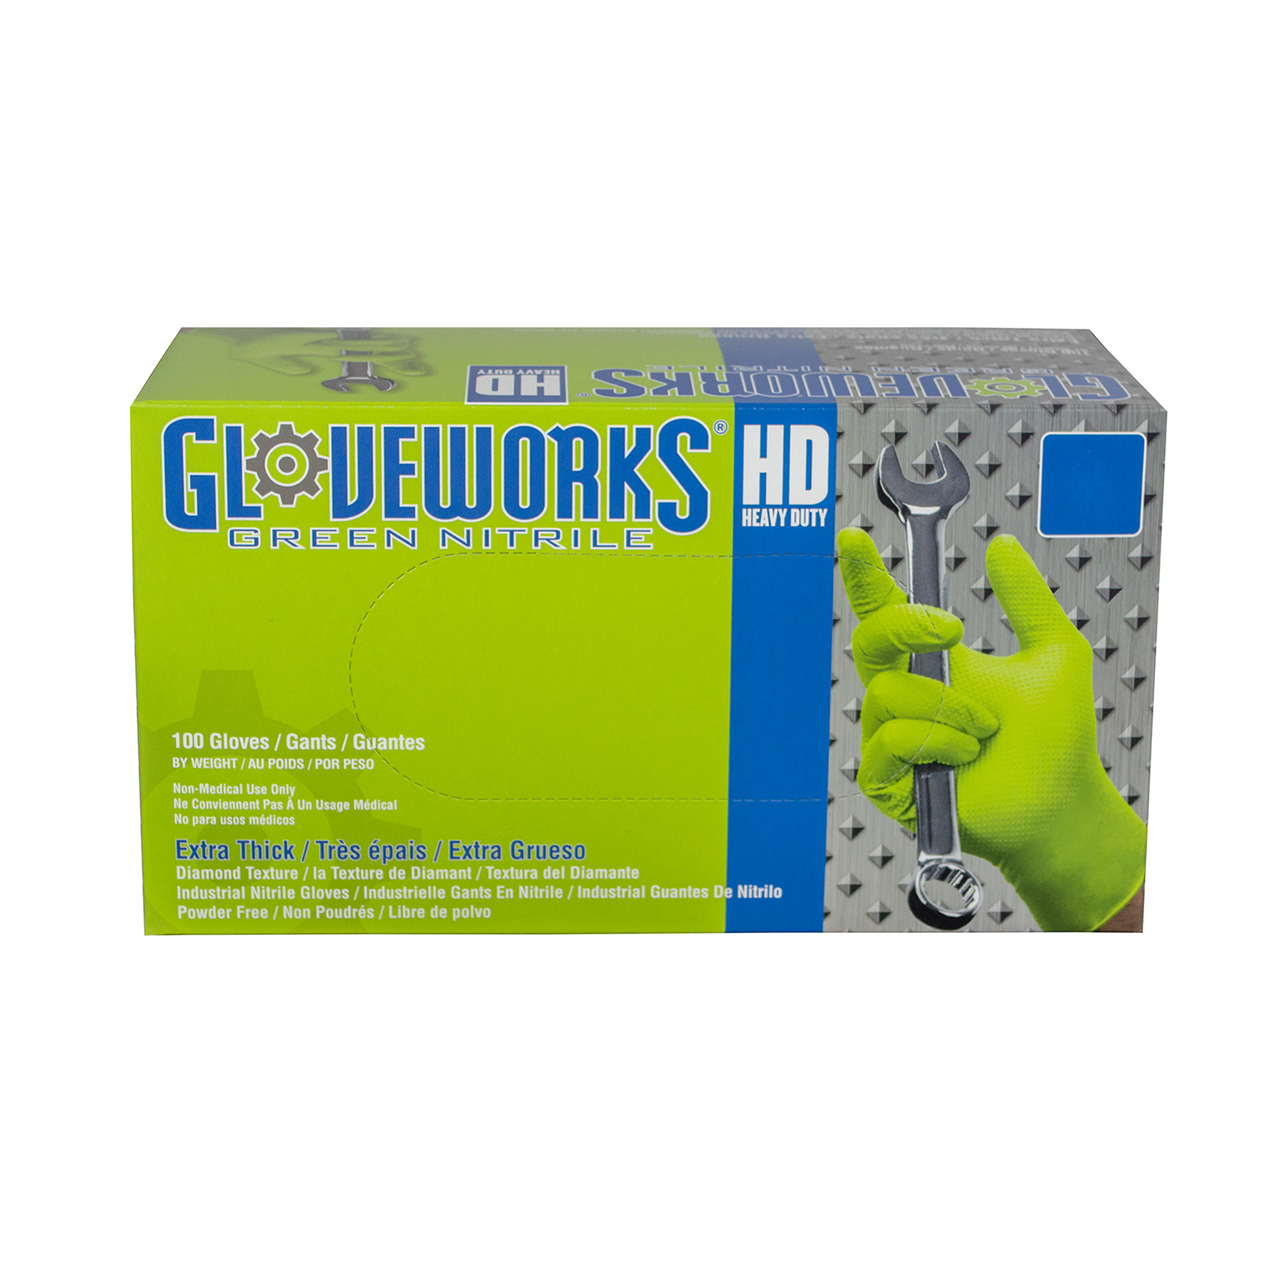 Gloveworks HD Green Nitrile Industrial Latex Free Disposable Work